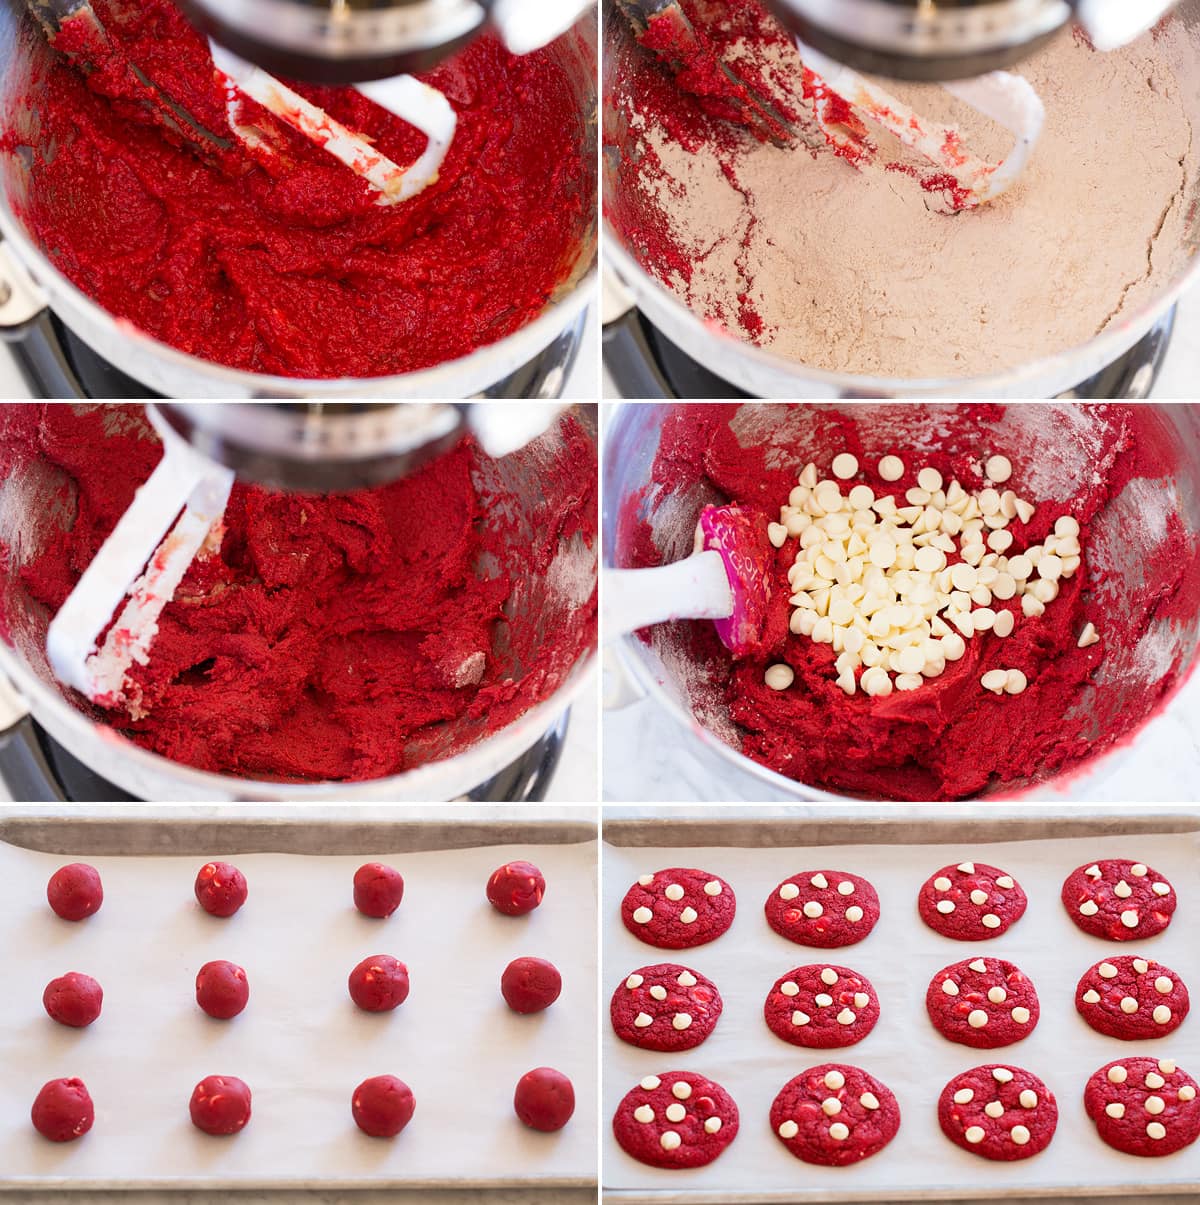 Collage of six images showing remaining steps of making red velvet cookie dough batter then shaping cookie dough into balls and placing on baking sheet.